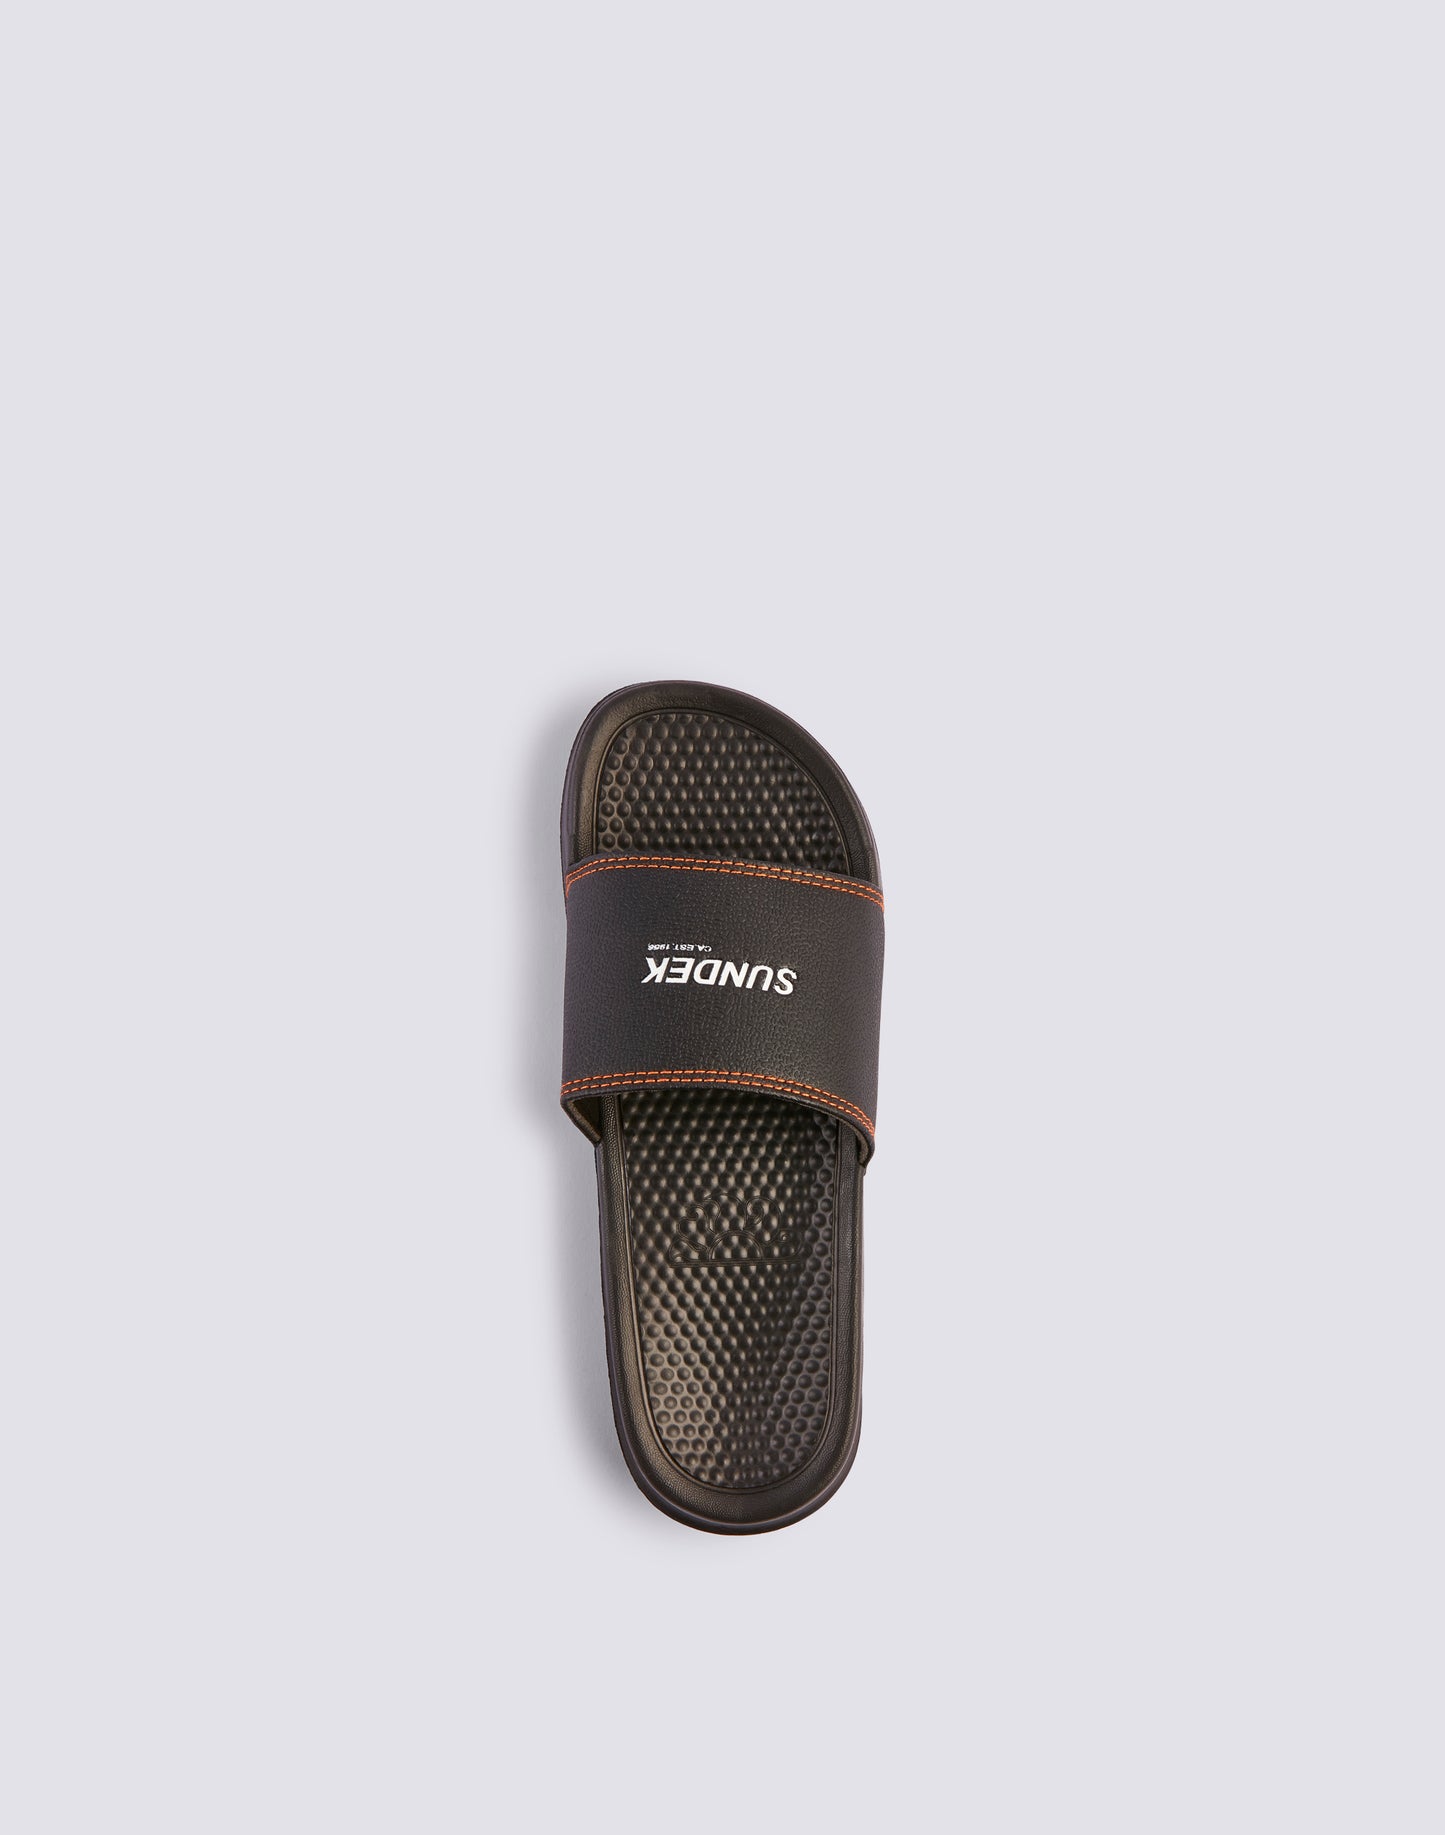 BAND SANDALS WITH CONTRASTING STITCHING